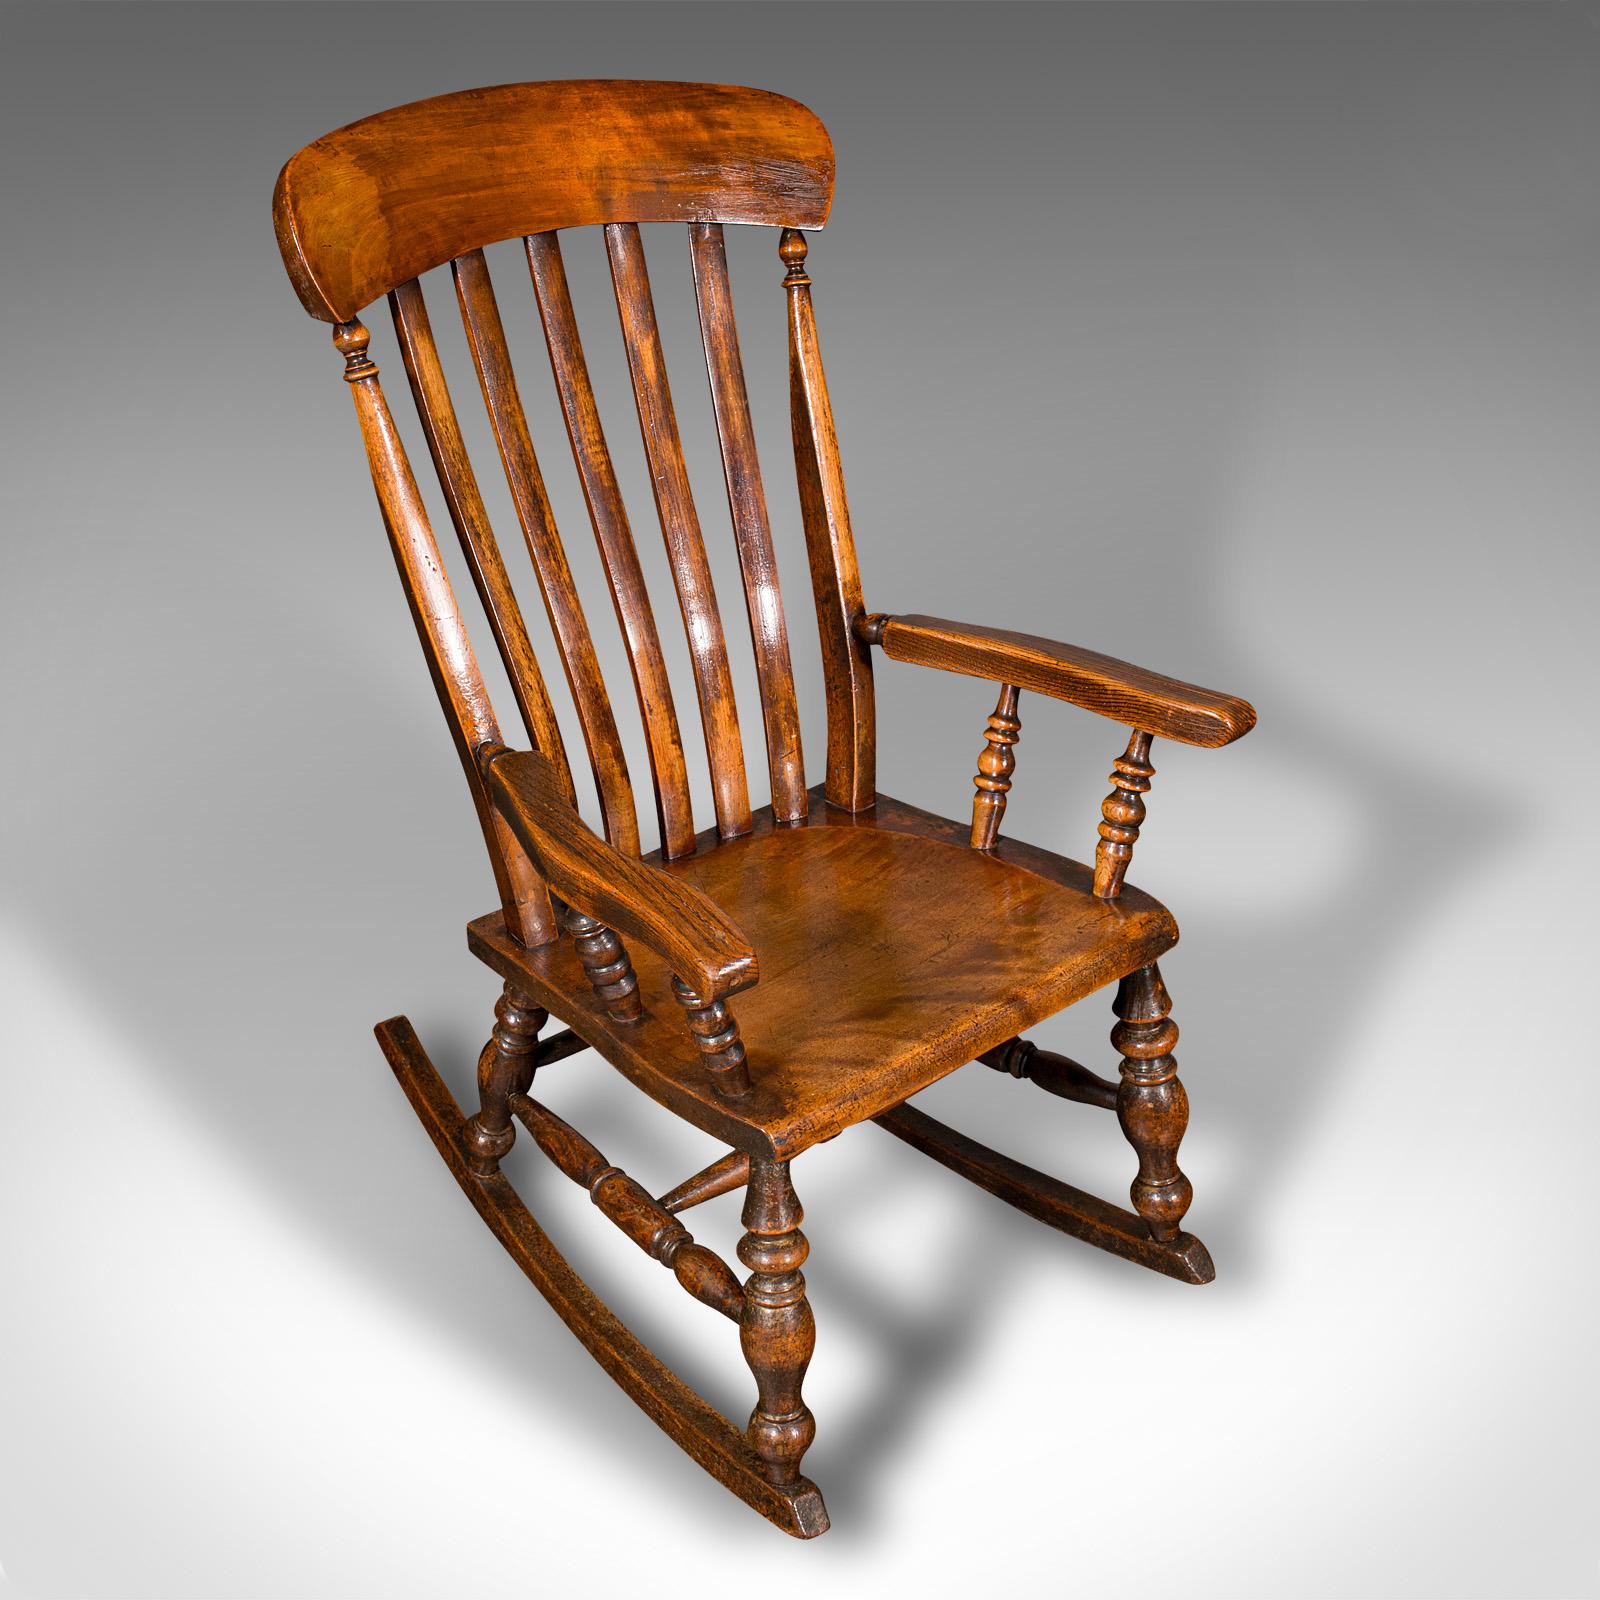 Antique Lath Back Rocking Chair, English Elm, Beech, Elbow Seat, Victorian, 1880 For Sale 1